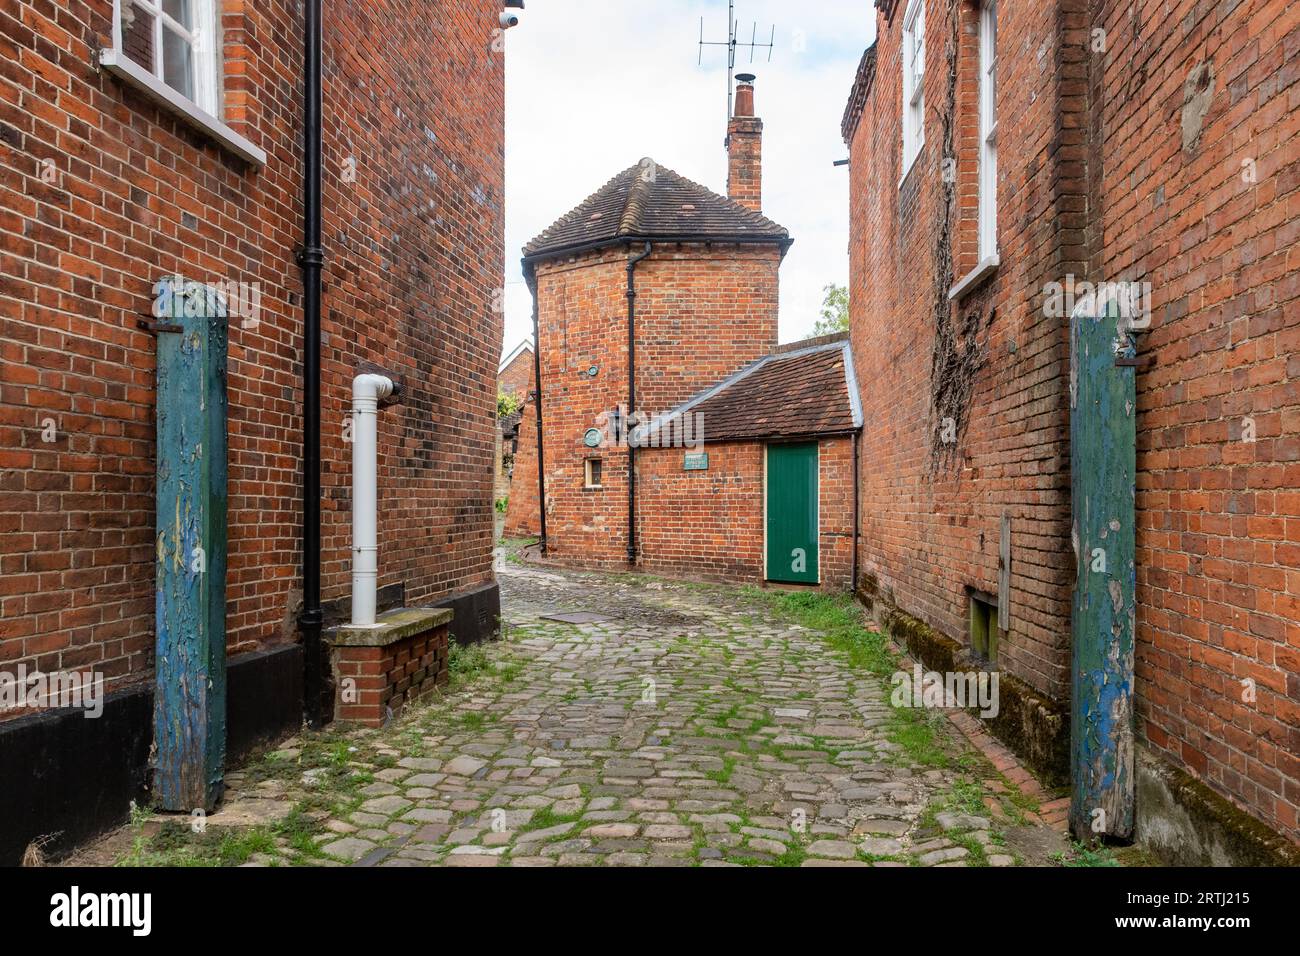 Malthouse Yard off West Street in Farnham town, Surrey, England, UK, with cobbles and historic buildings Stock Photo